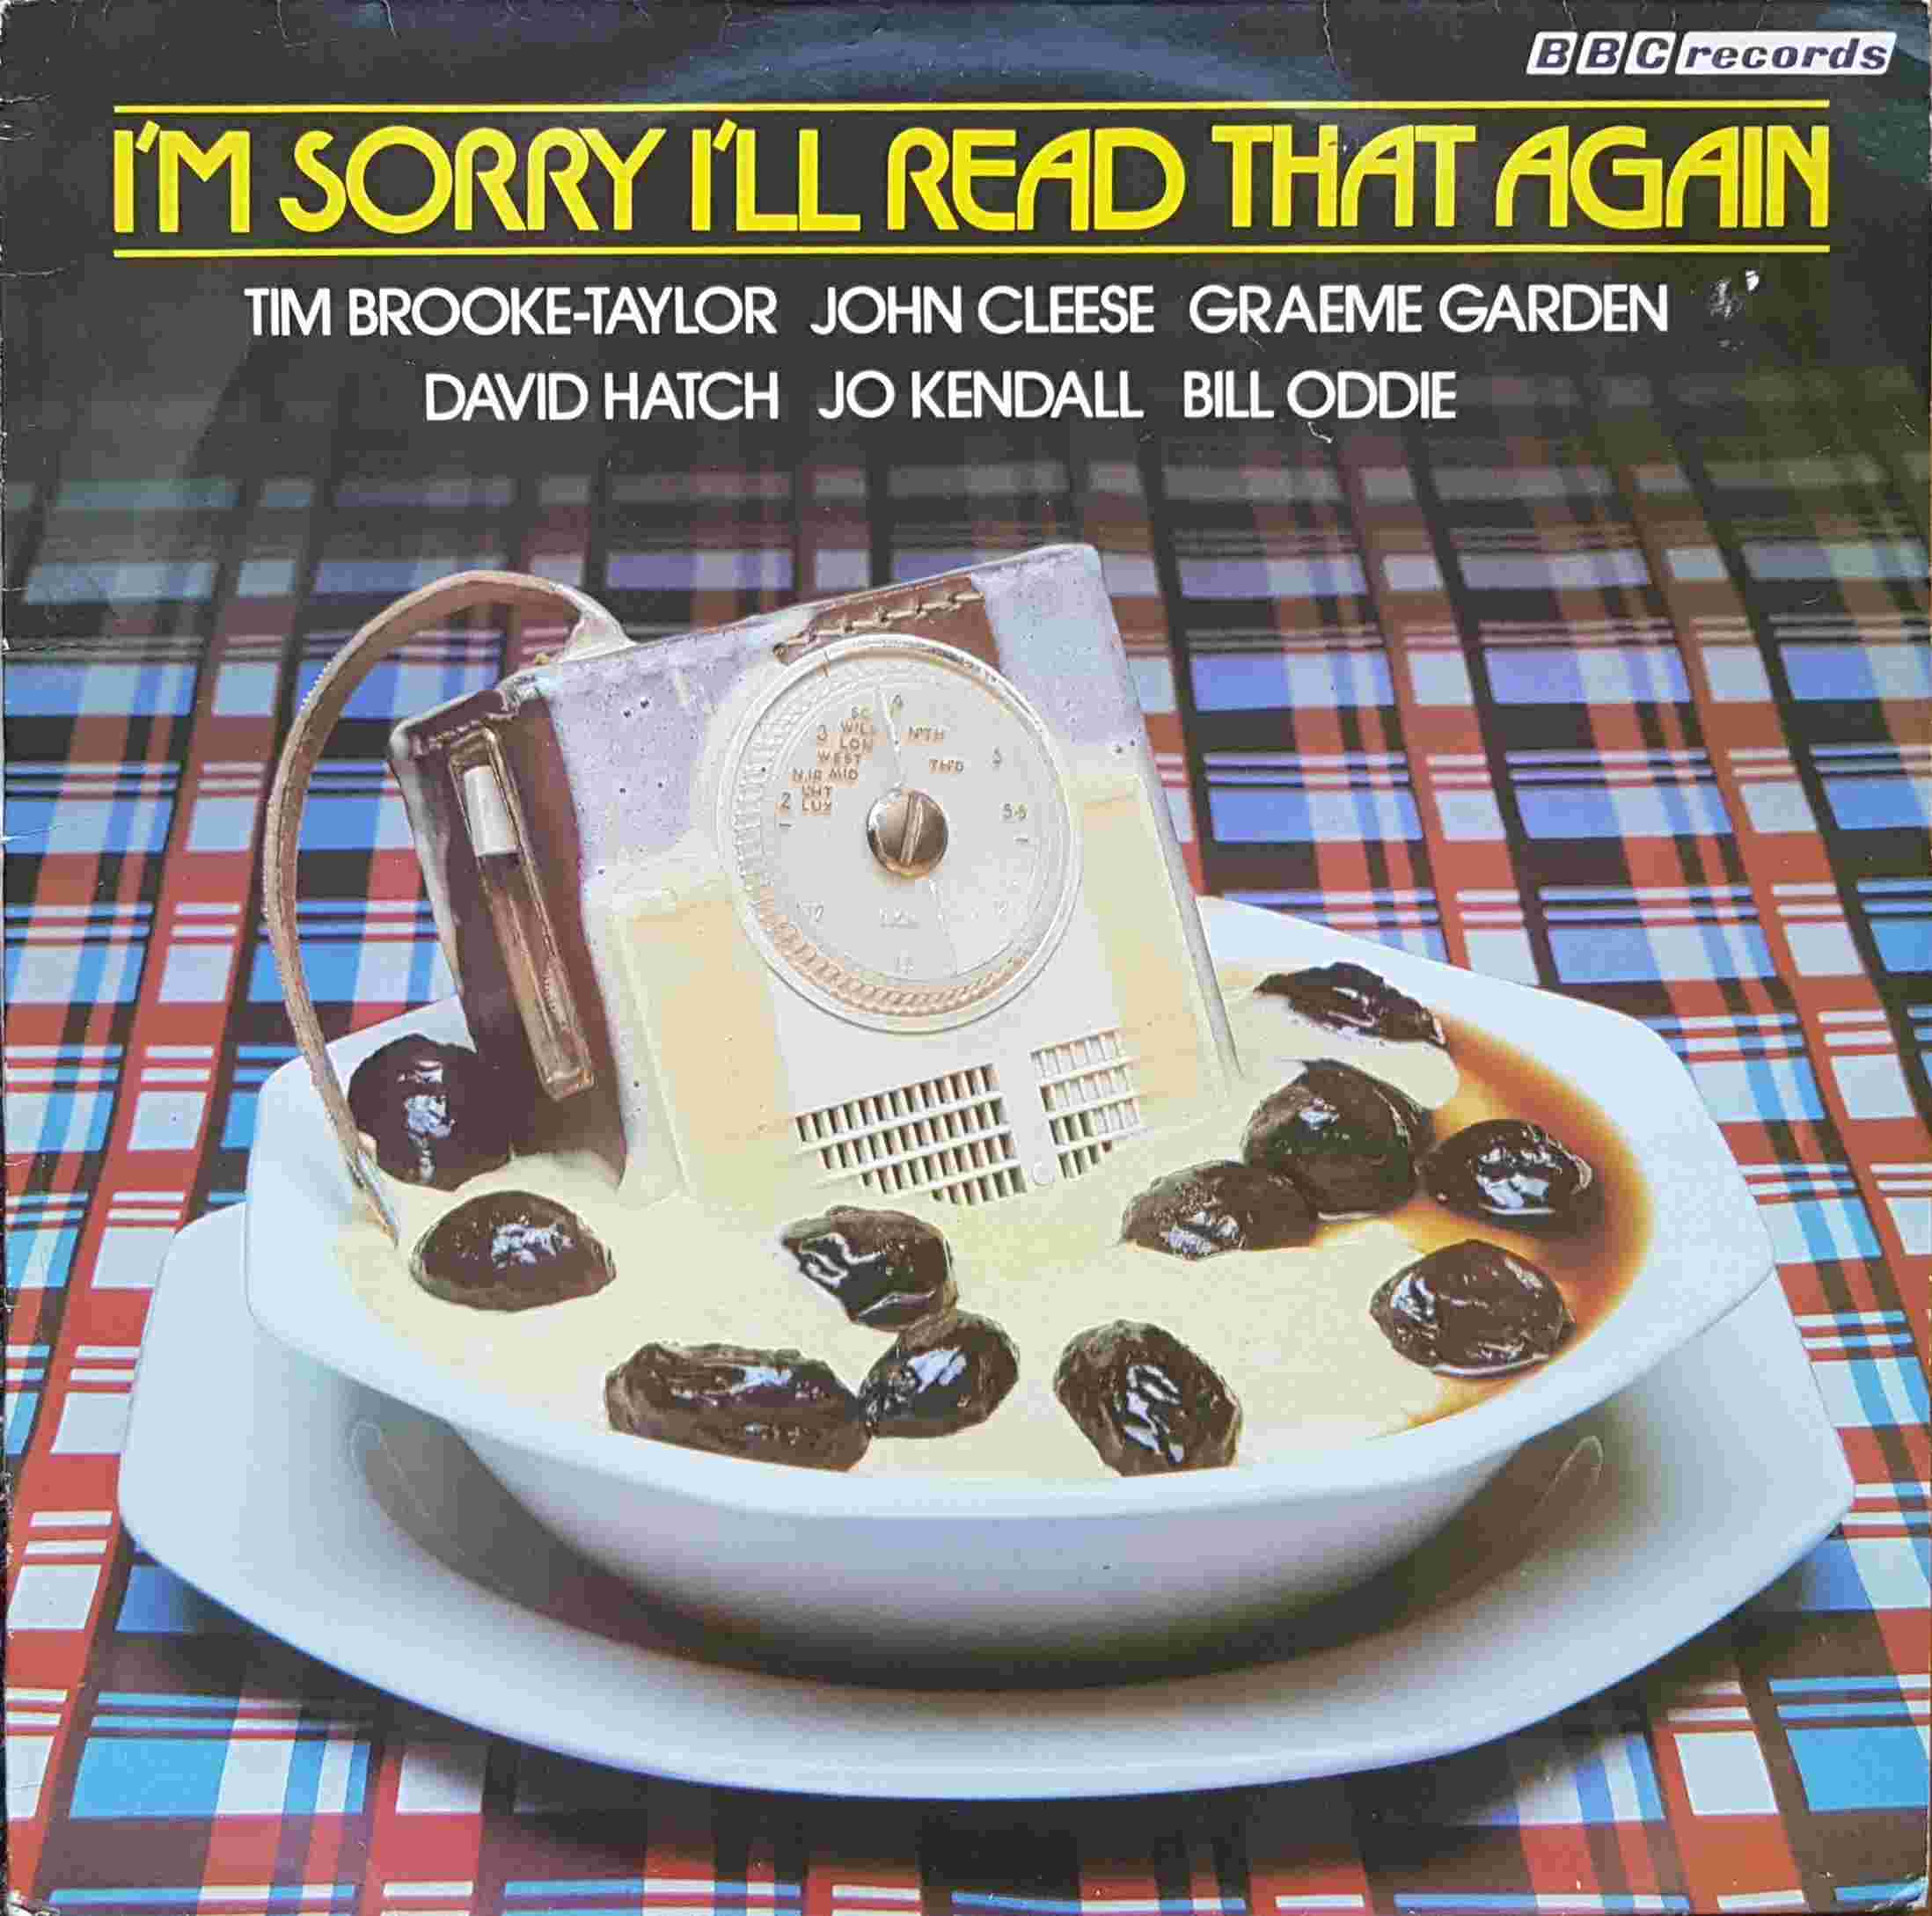 Picture of REH 342 I'm sorry, I'll read that again by artist Tim Brooke-Taylor / John Cleese / Graeme Garden / David Hatch / Jo Kendall / Bill Oddie from the BBC albums - Records and Tapes library